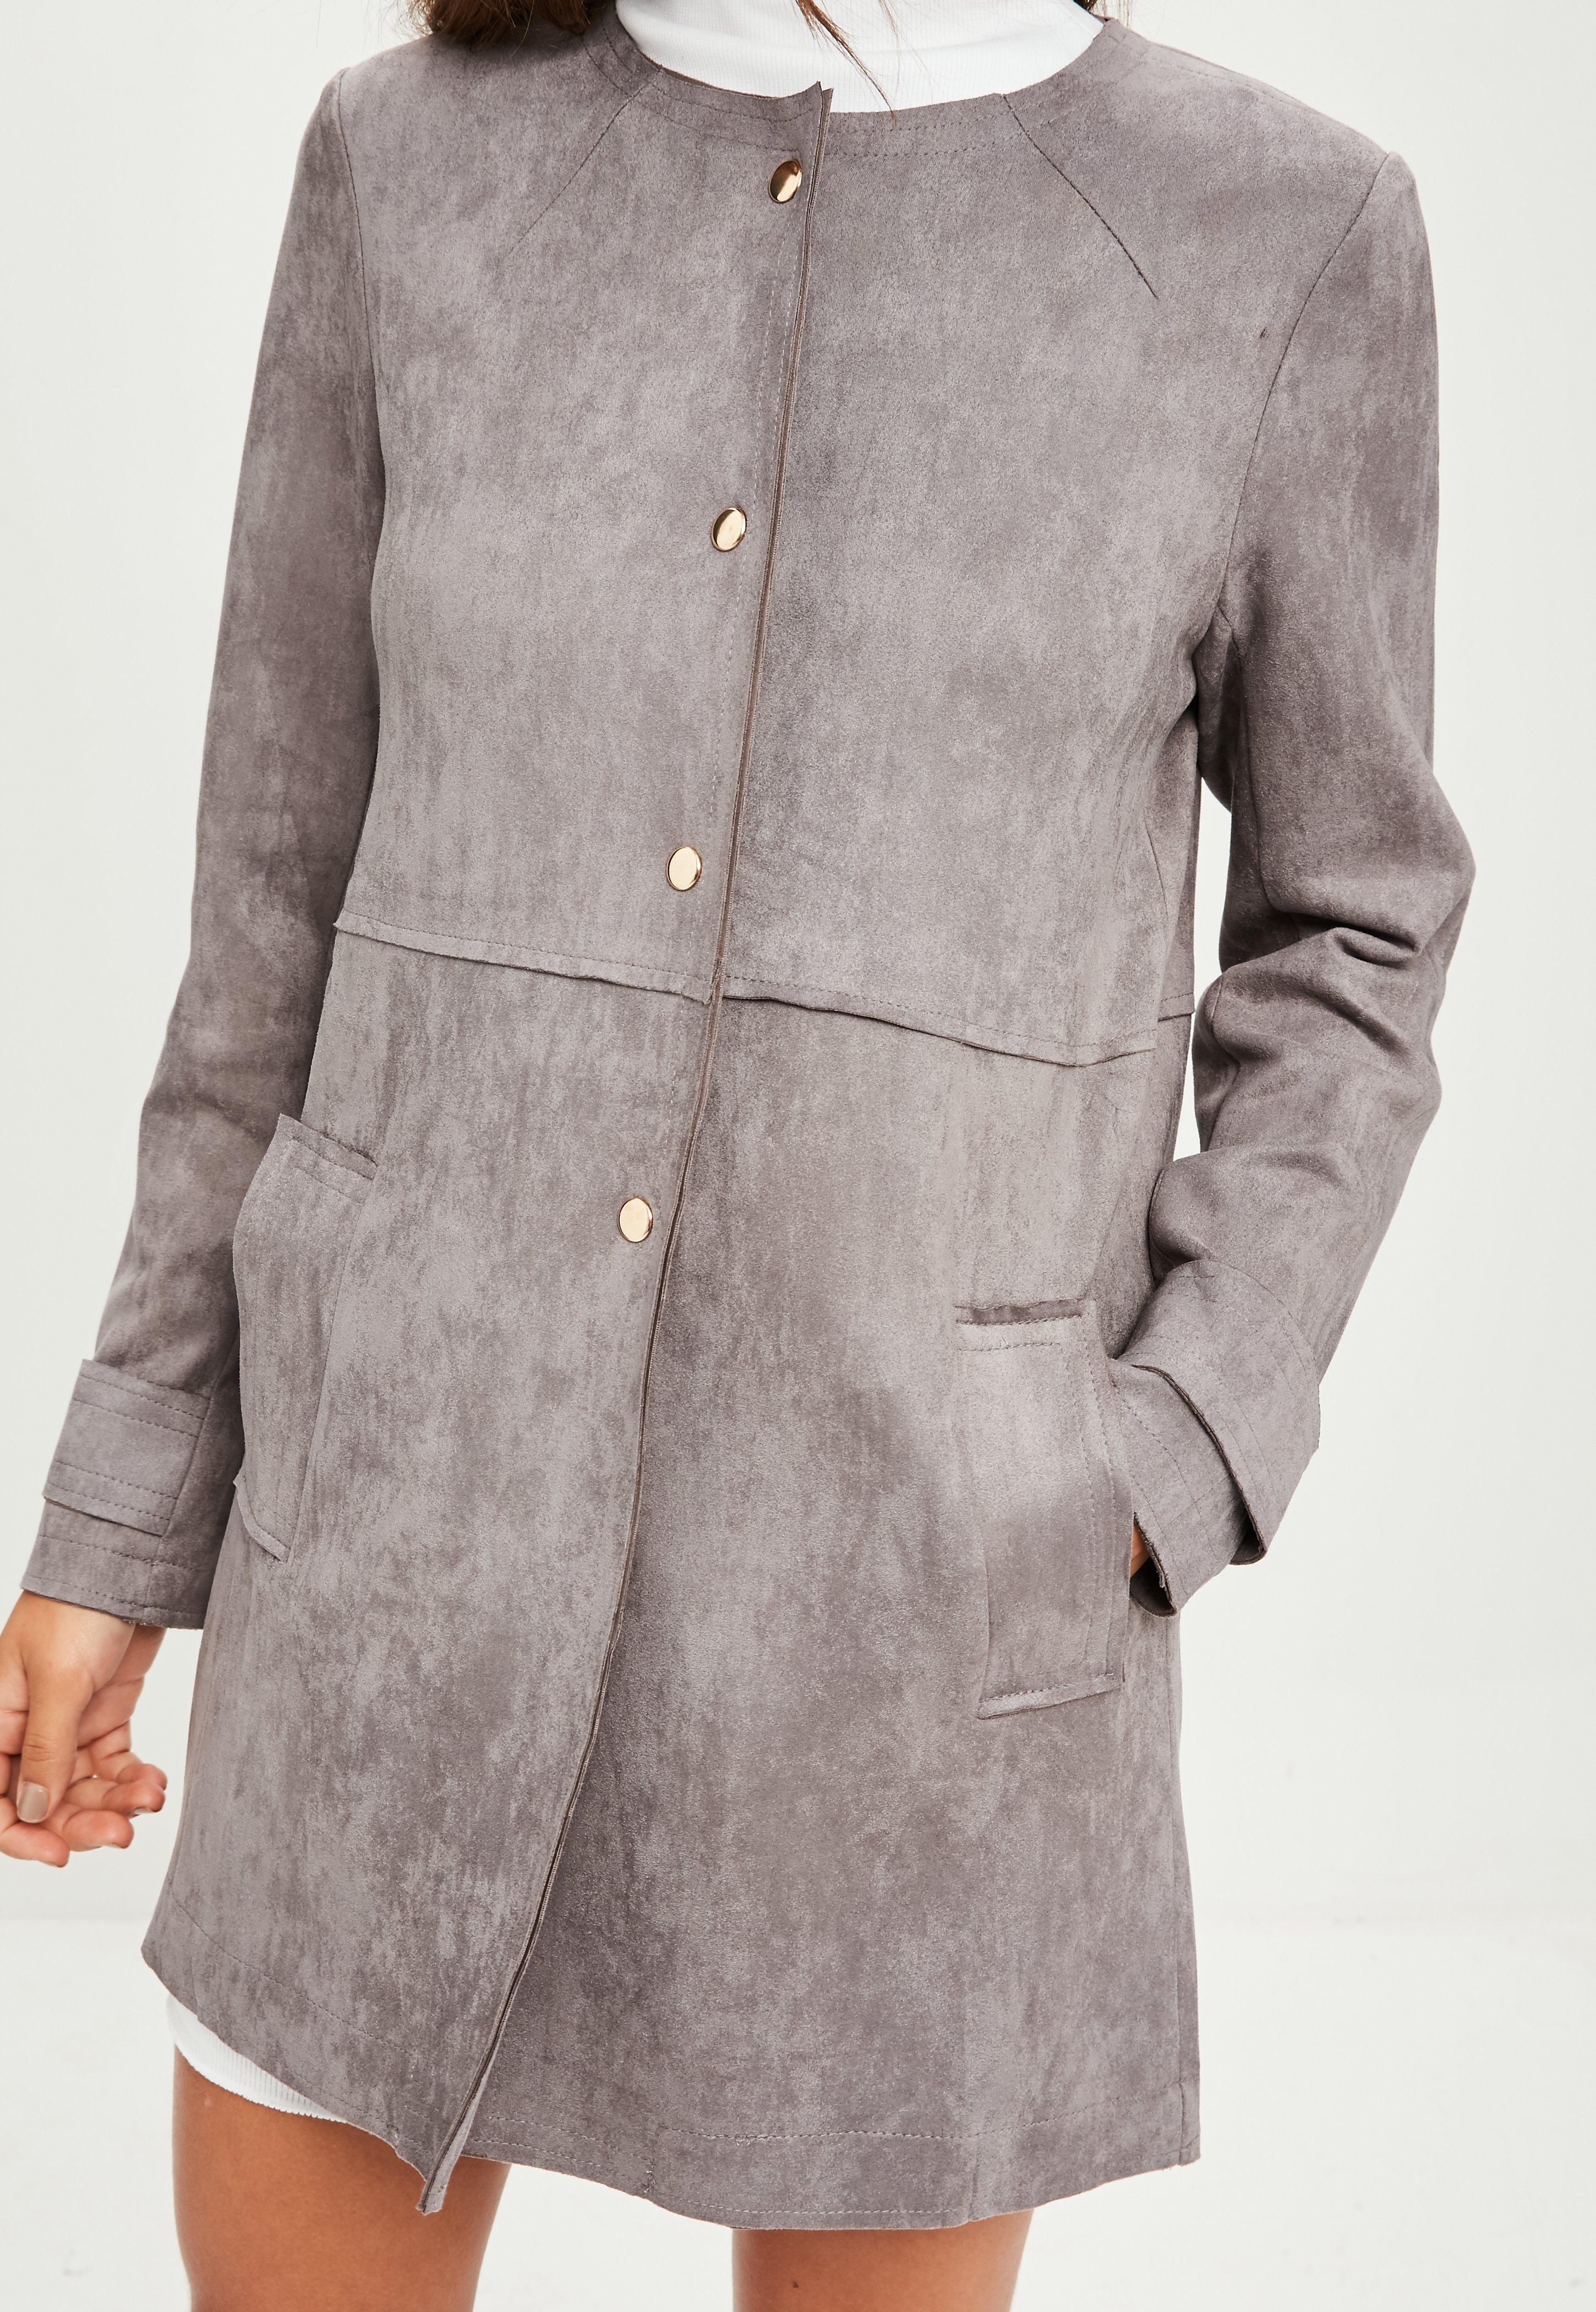 Lyst - Missguided Grey Faux Suede Collarless Jacket in Gray